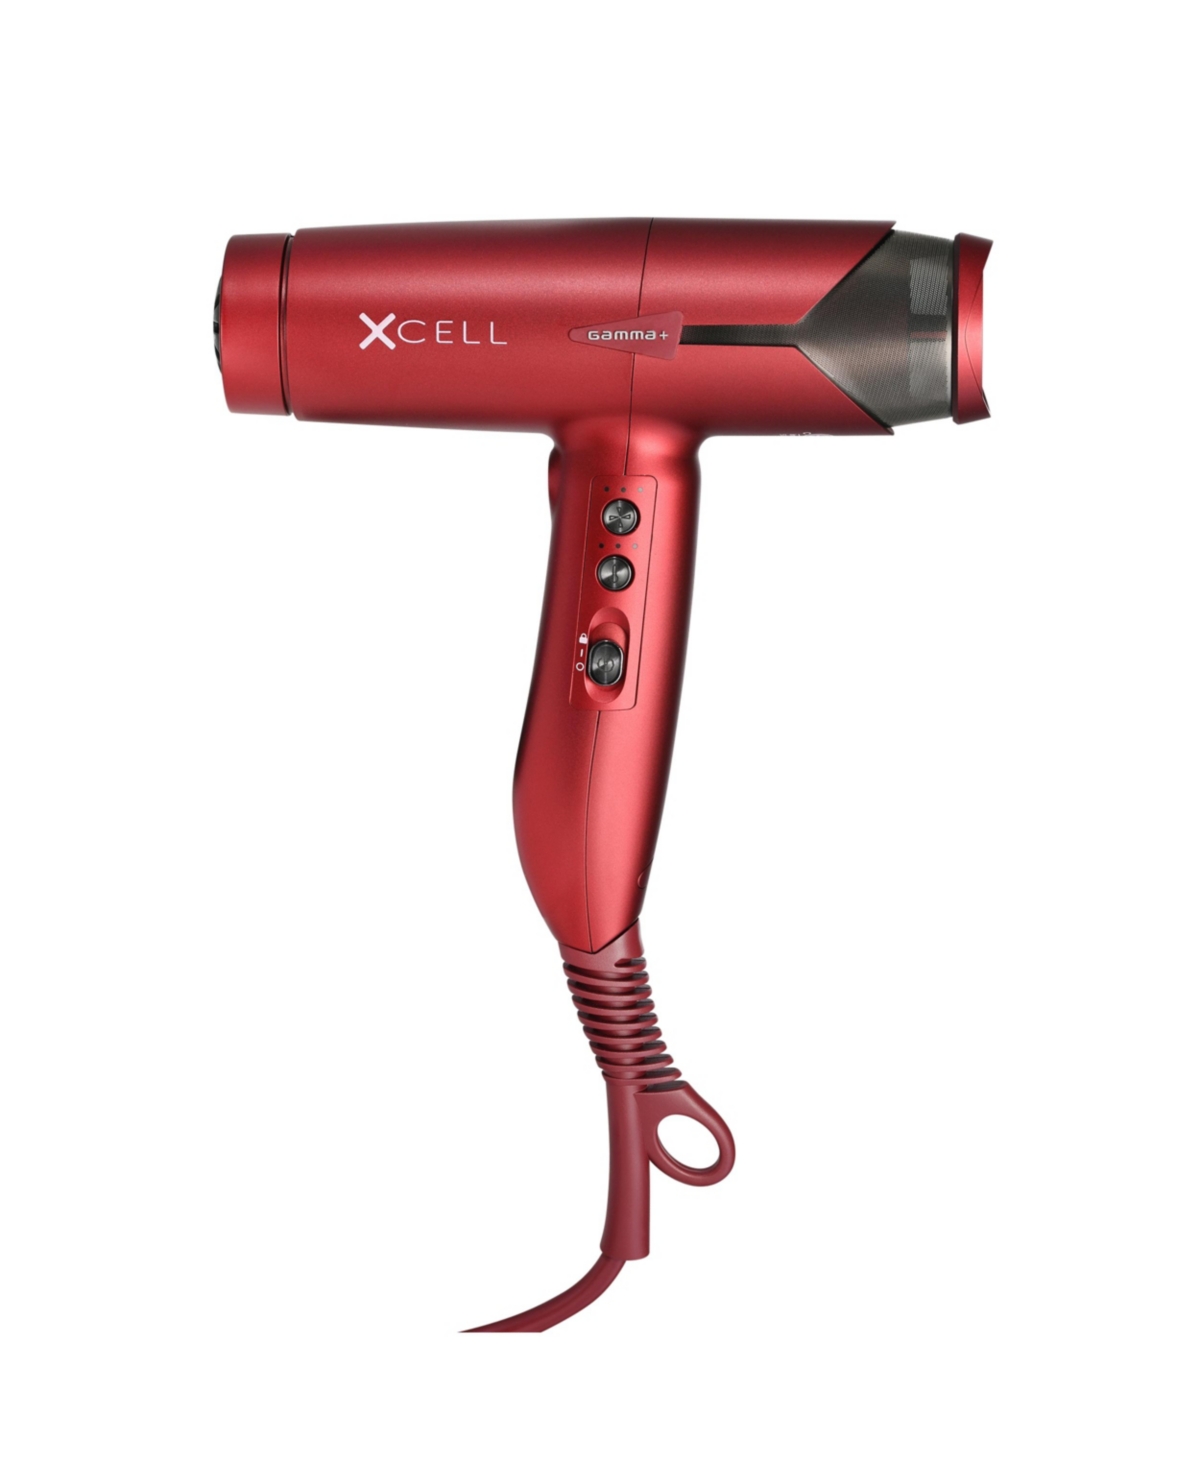 Xcell Blow Dryer - Red